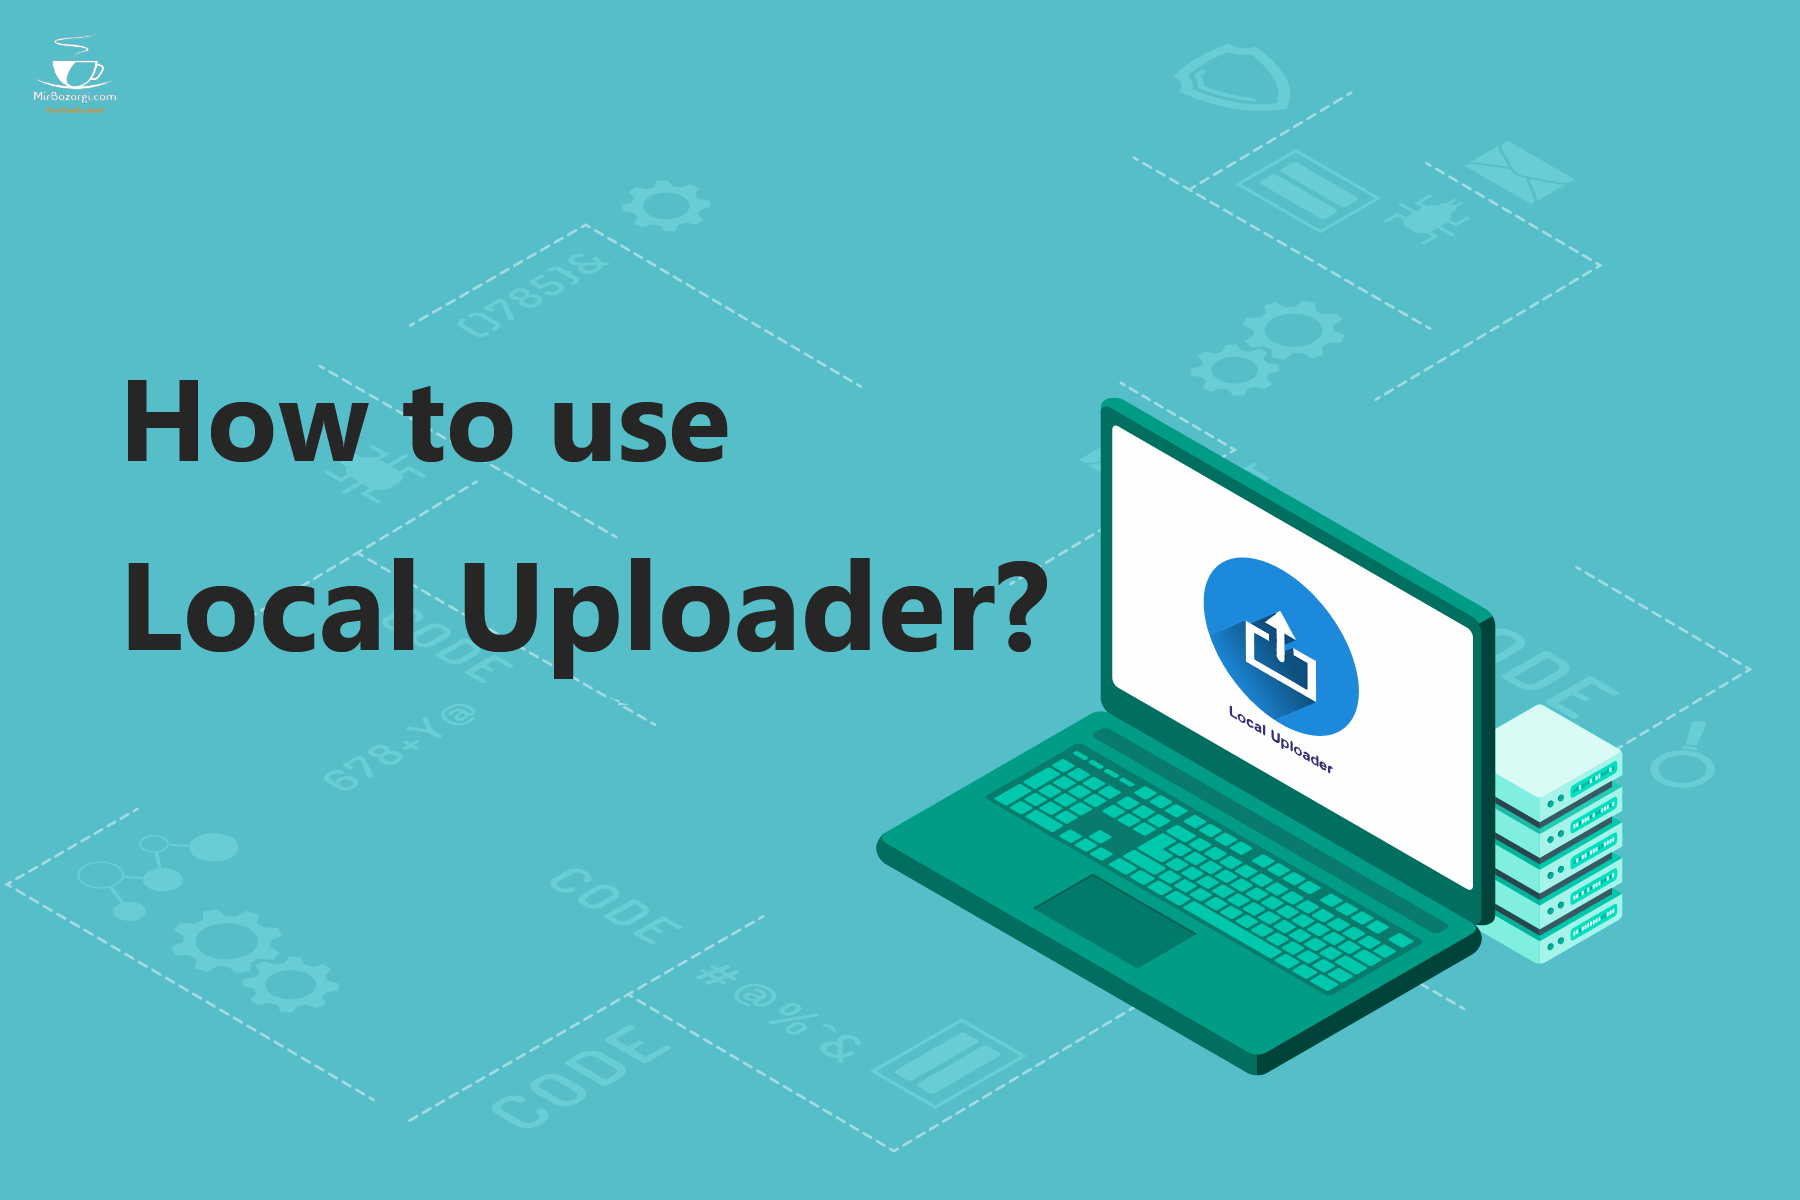 How to use Local Uploader